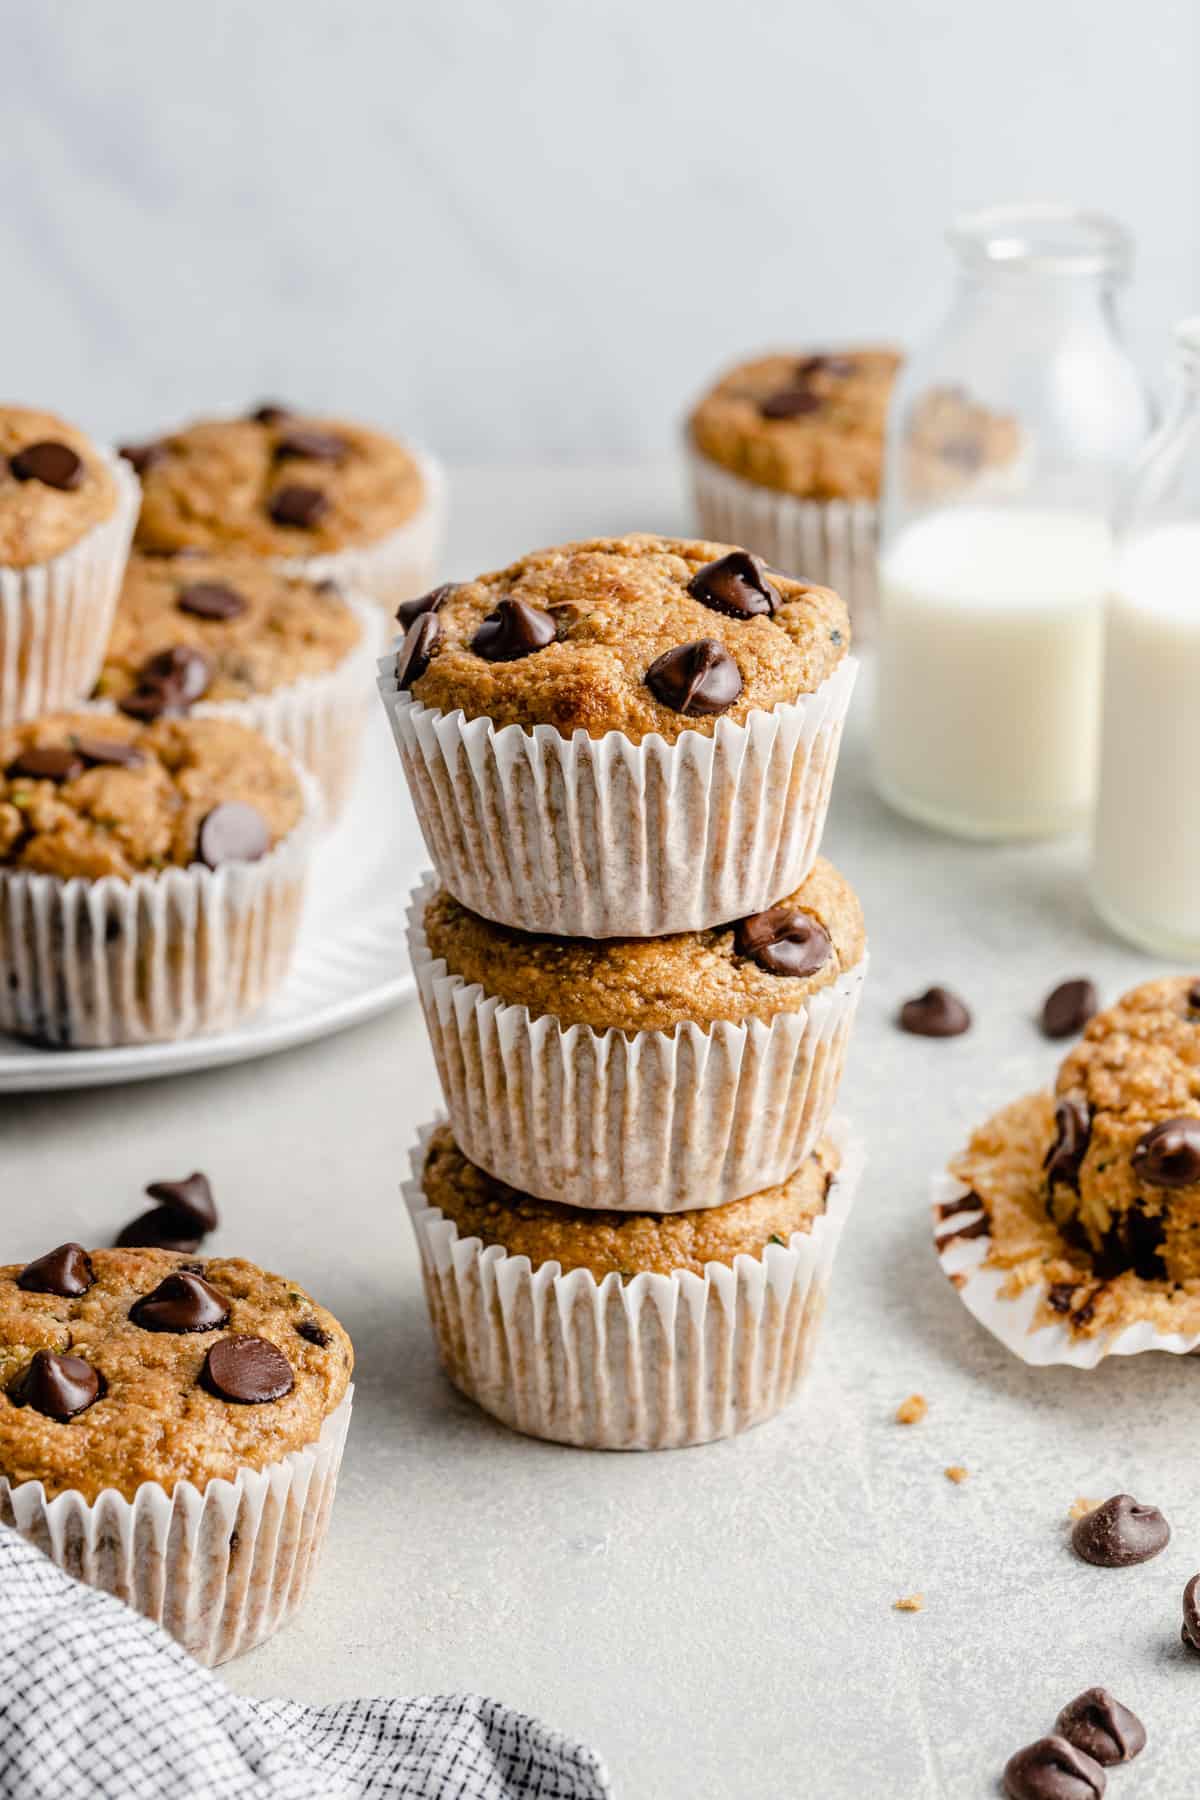 muffins stacked on top of each other